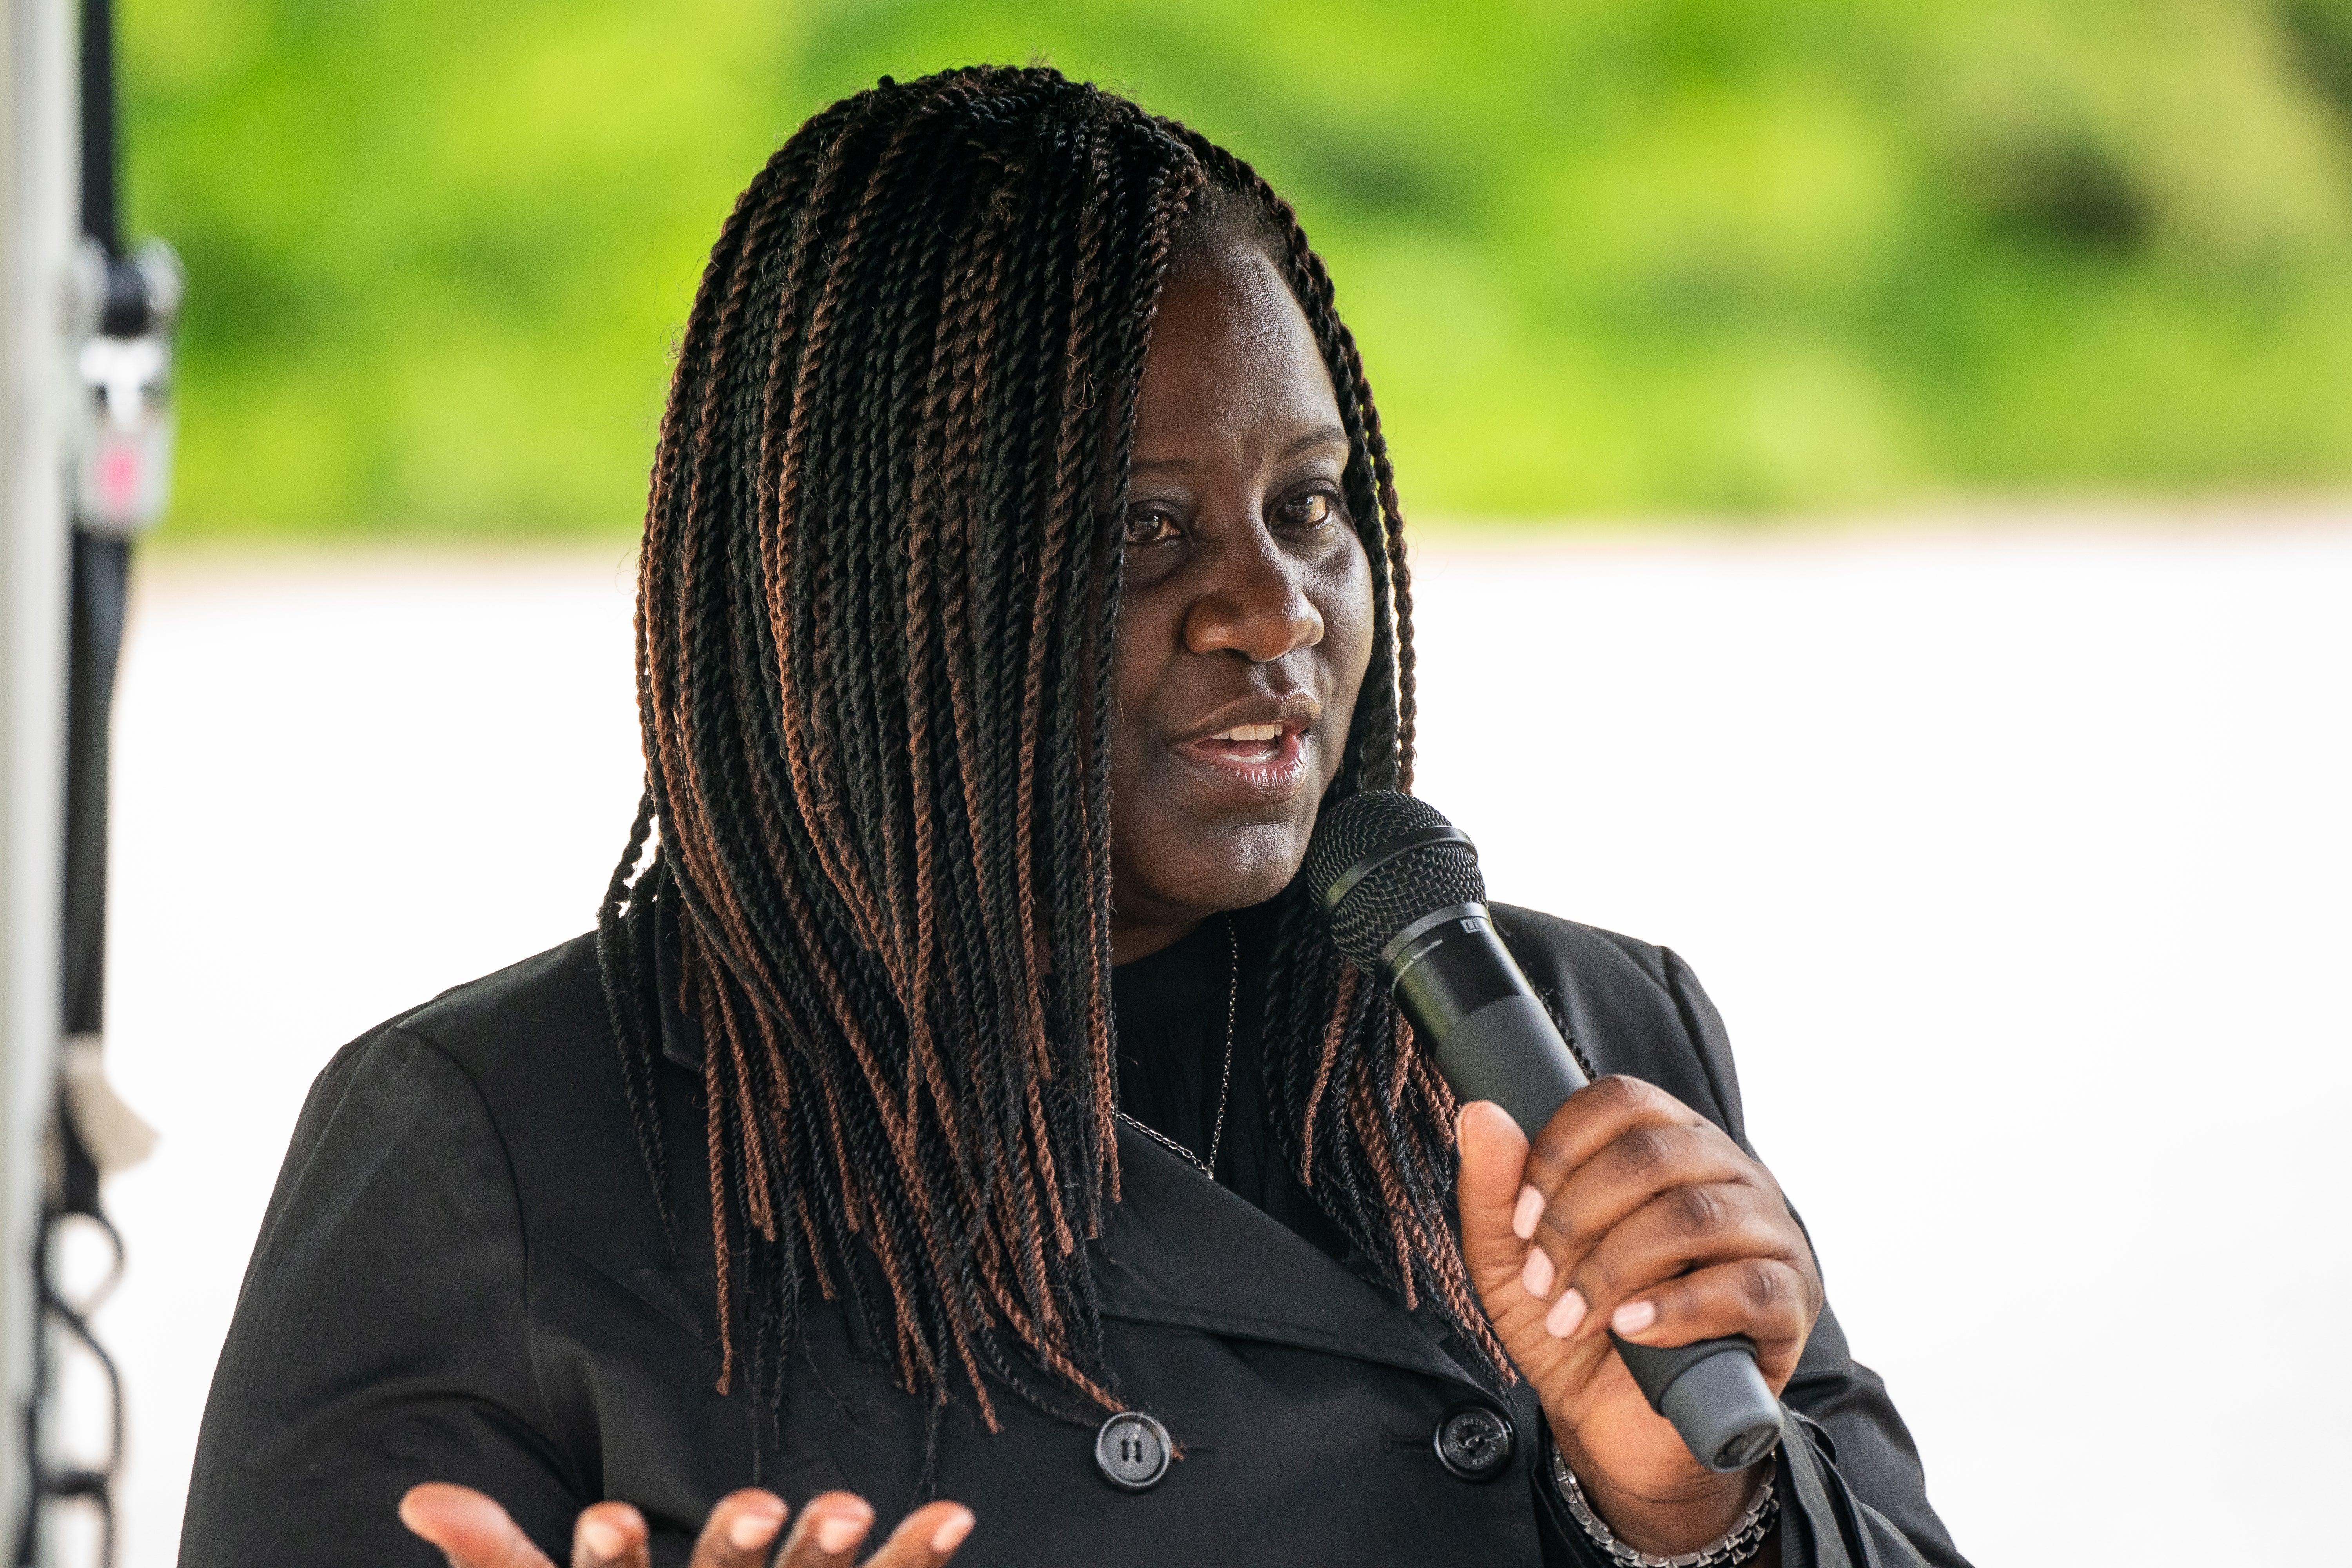 Labour MP Marsha de Cordova condemned Lord Muray’s comments as “completely unacceptable”